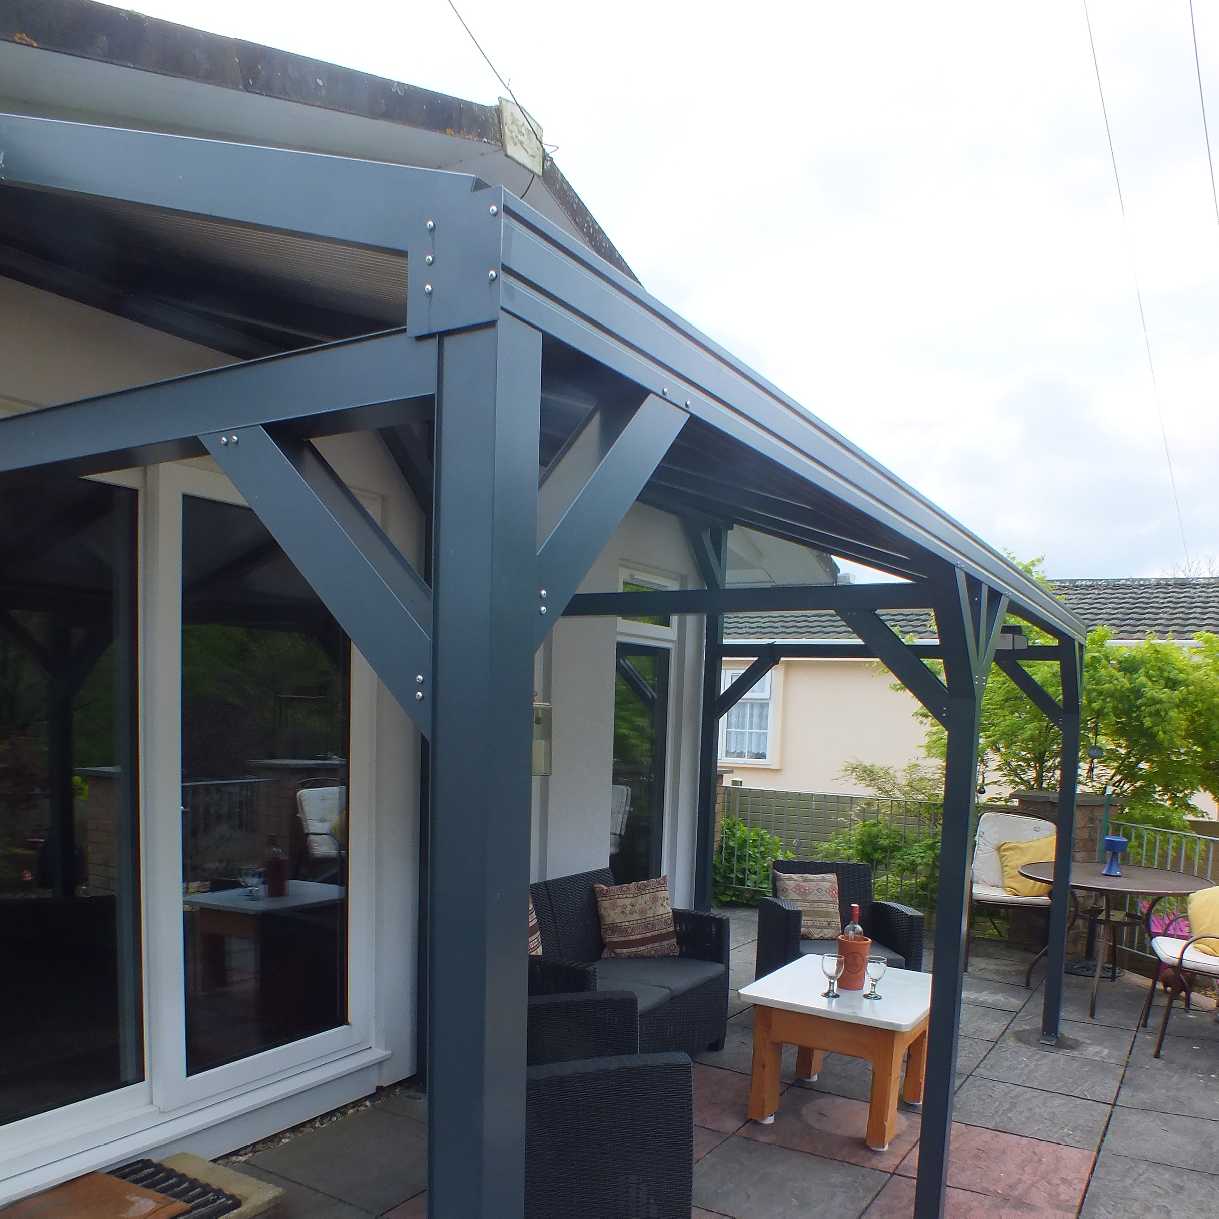 Affordable Omega Smart Free-Standing, Anthracite Grey MonoPitch Roof Canopy with 16mm Polycarbonate Glazing - 7.4m (W) x 2.0m (P), (8) Supporting Posts